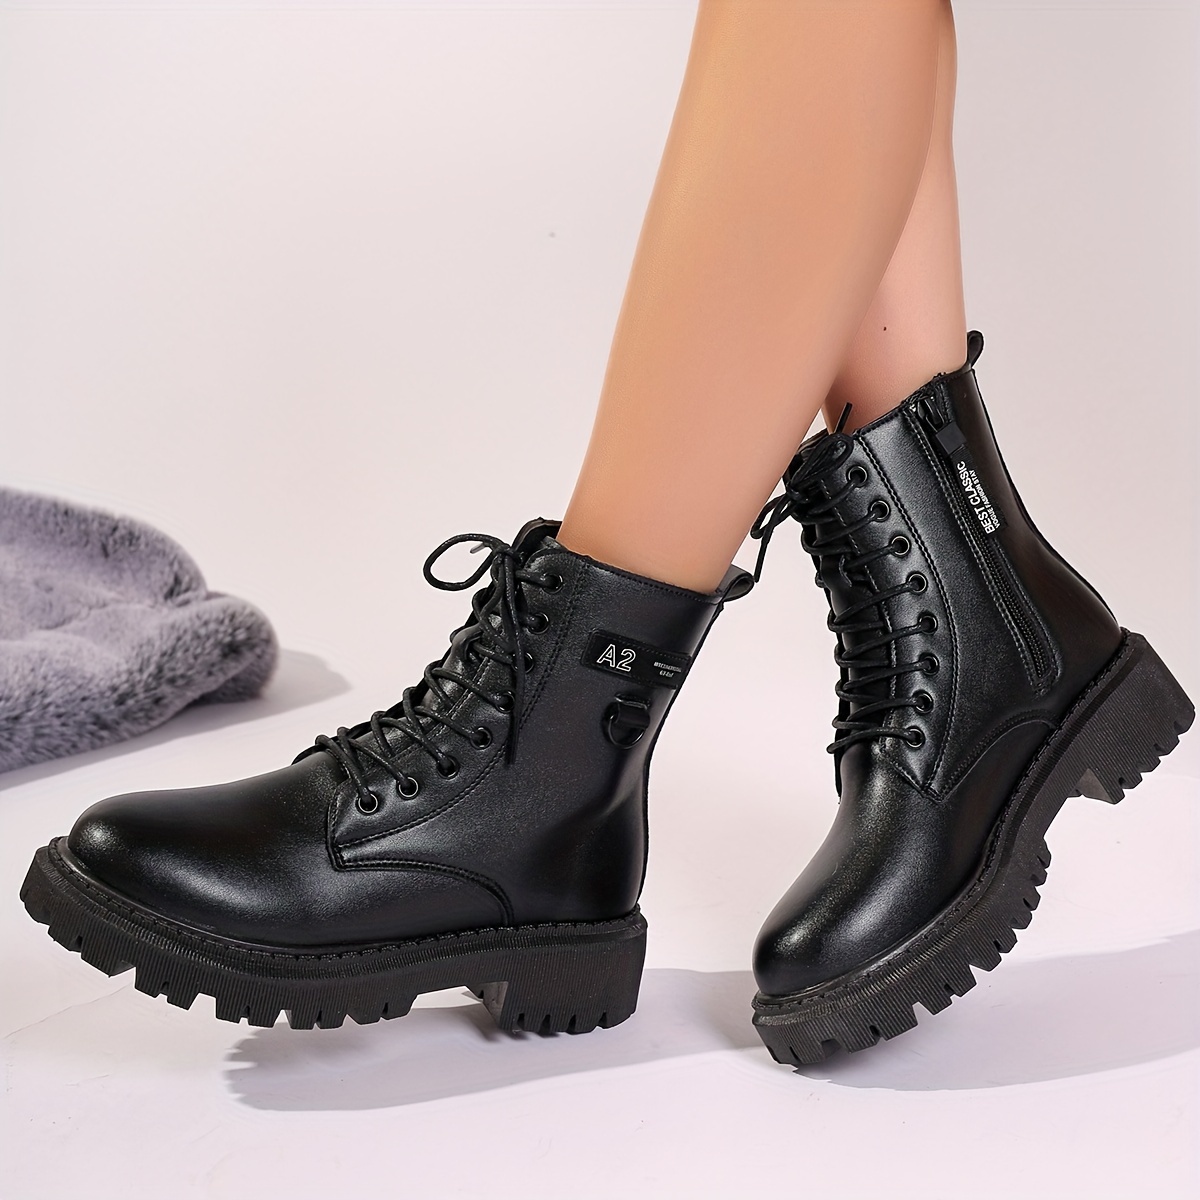 

Women's Solid Color Casual Boots, Platform Side Zipper Soft Sole Walking Boots, Comfort Round Toe Knight Boots